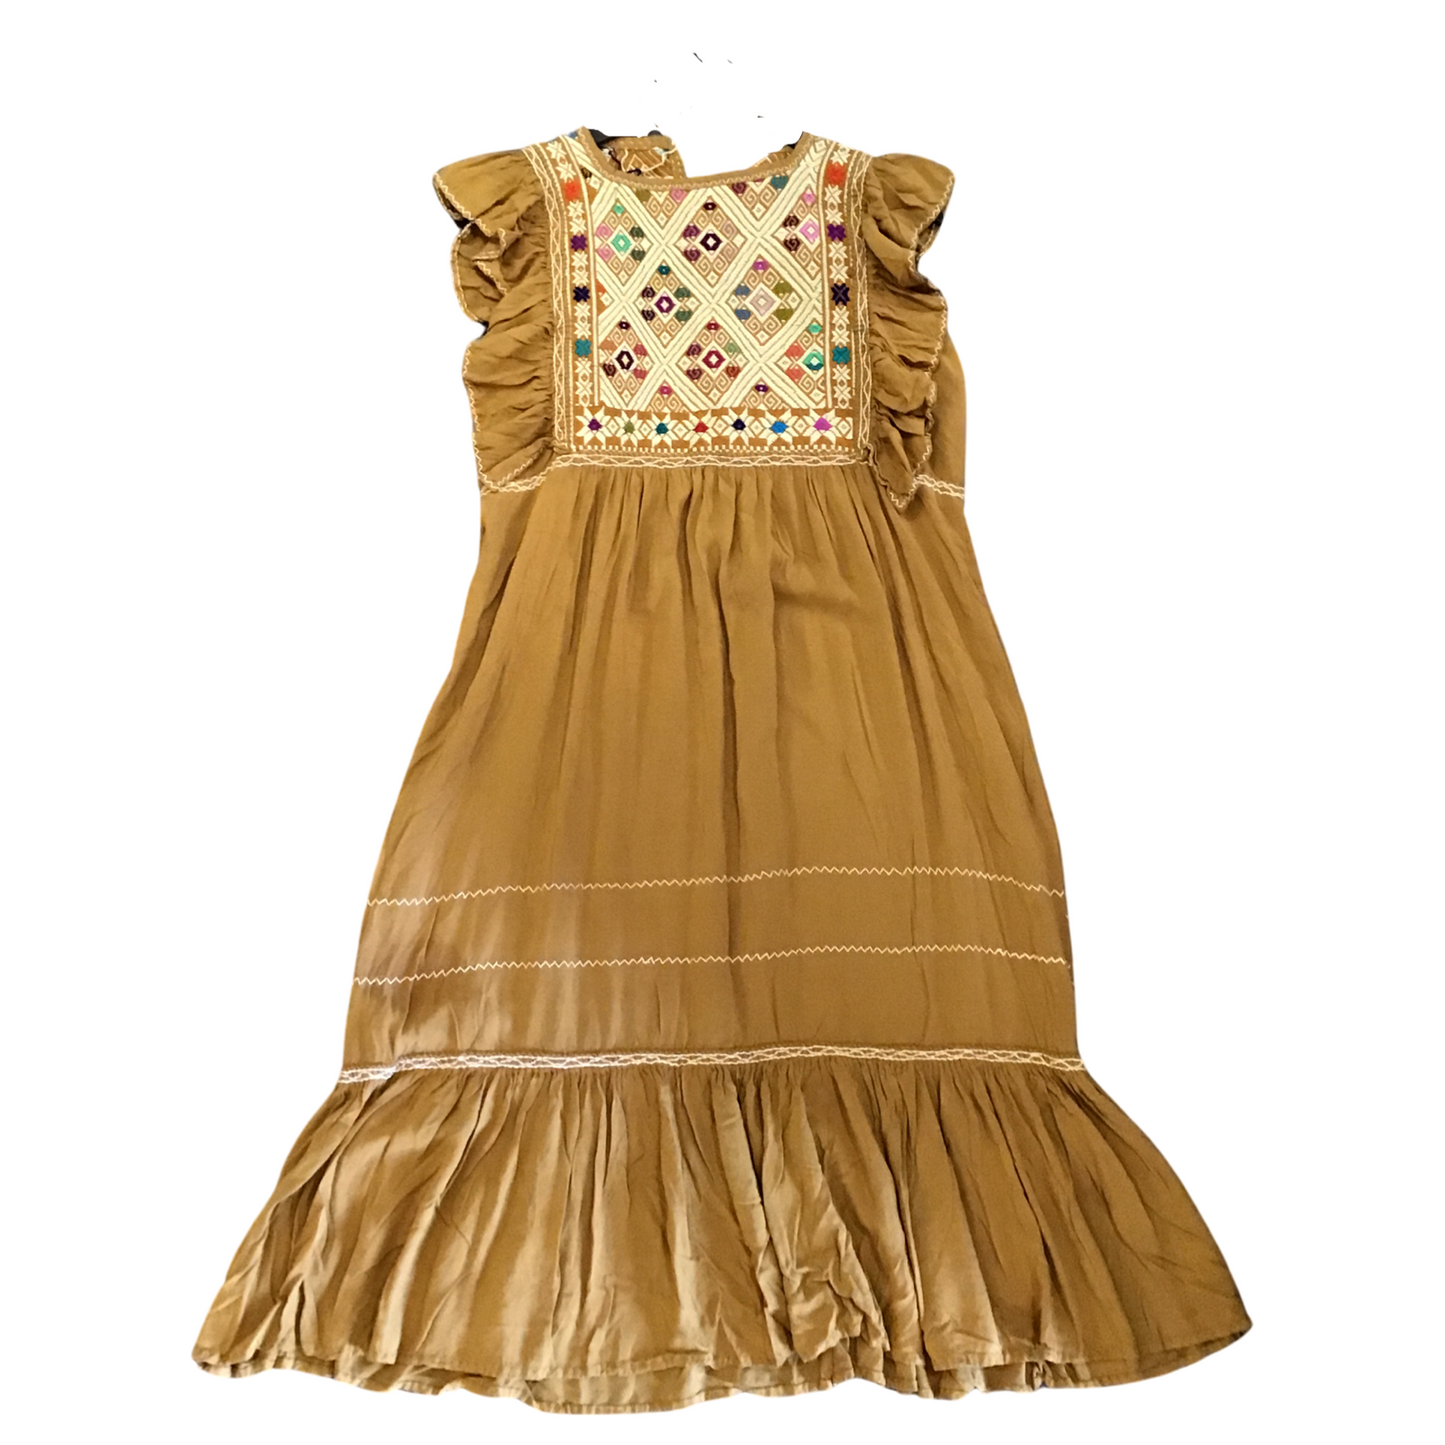 Embroidered Ruffled Dress